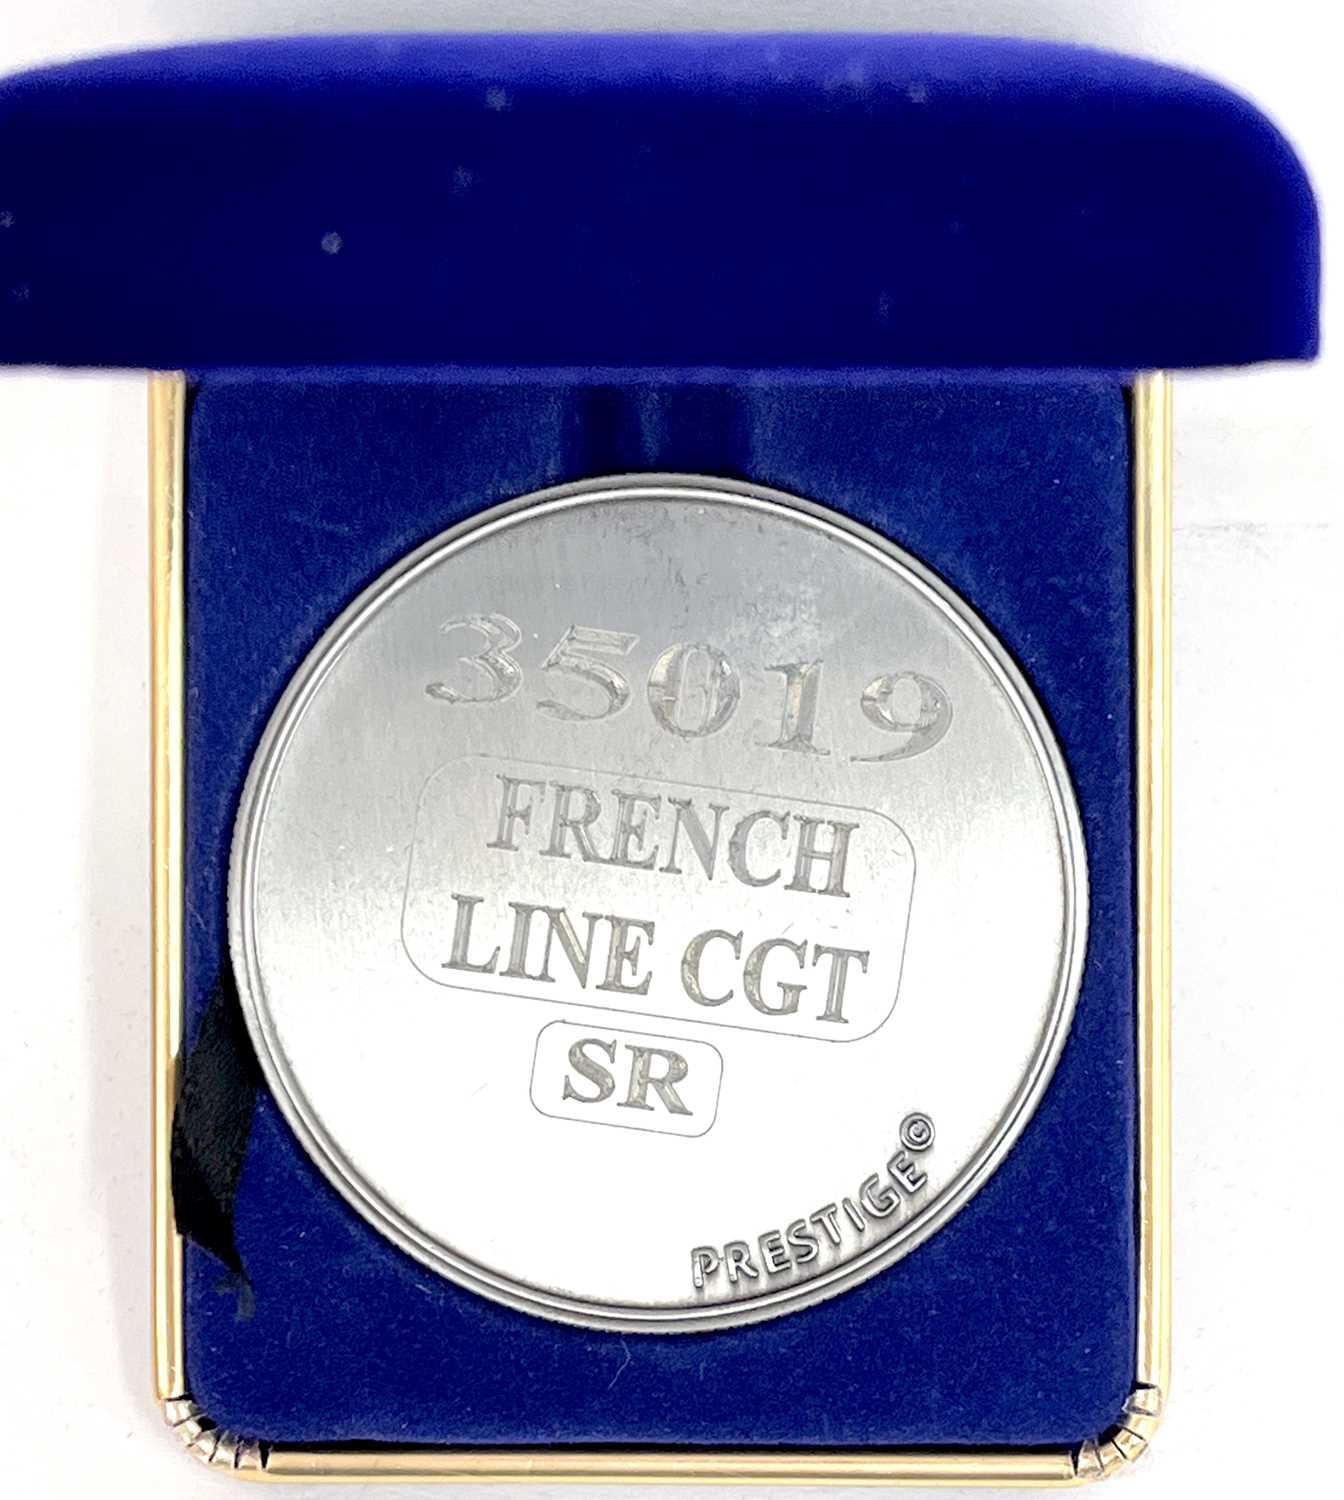 A commemorative silver award medallion to 35019 French Line CGT SR - Image 2 of 2